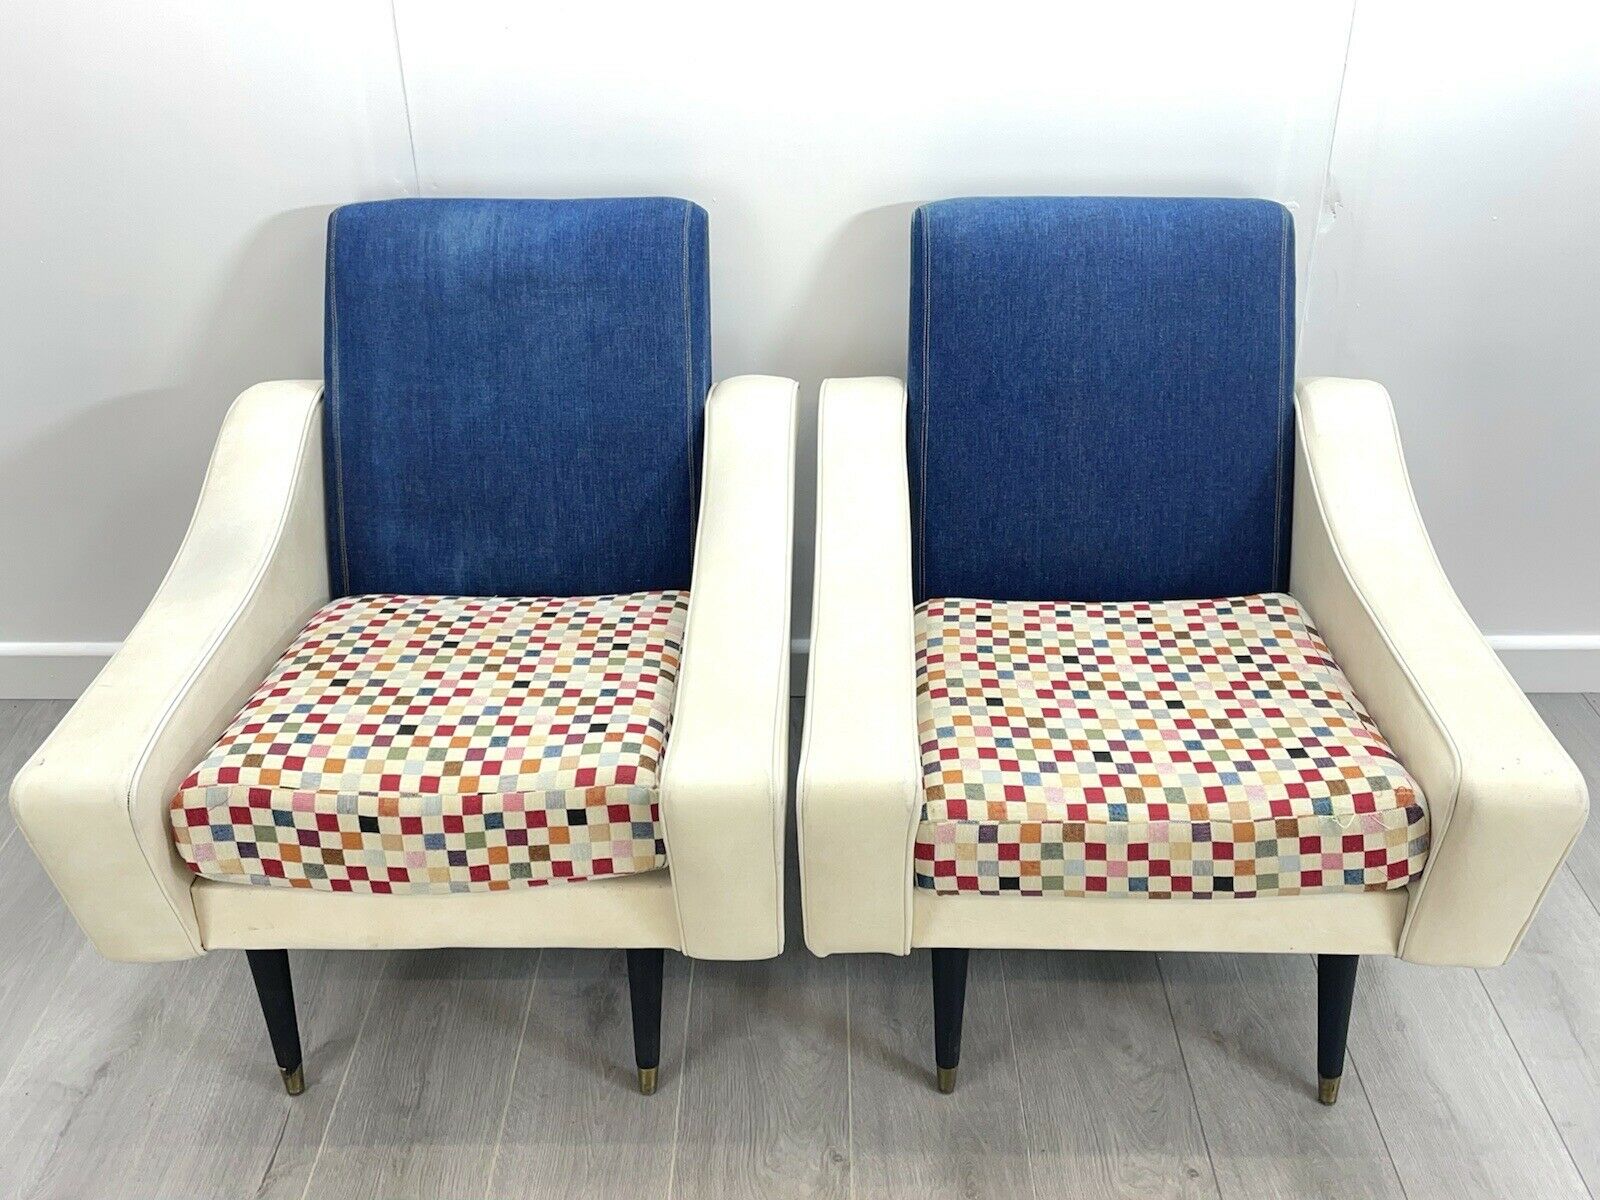 Pair of Retro, White Leather and Denim Lounge Chairs